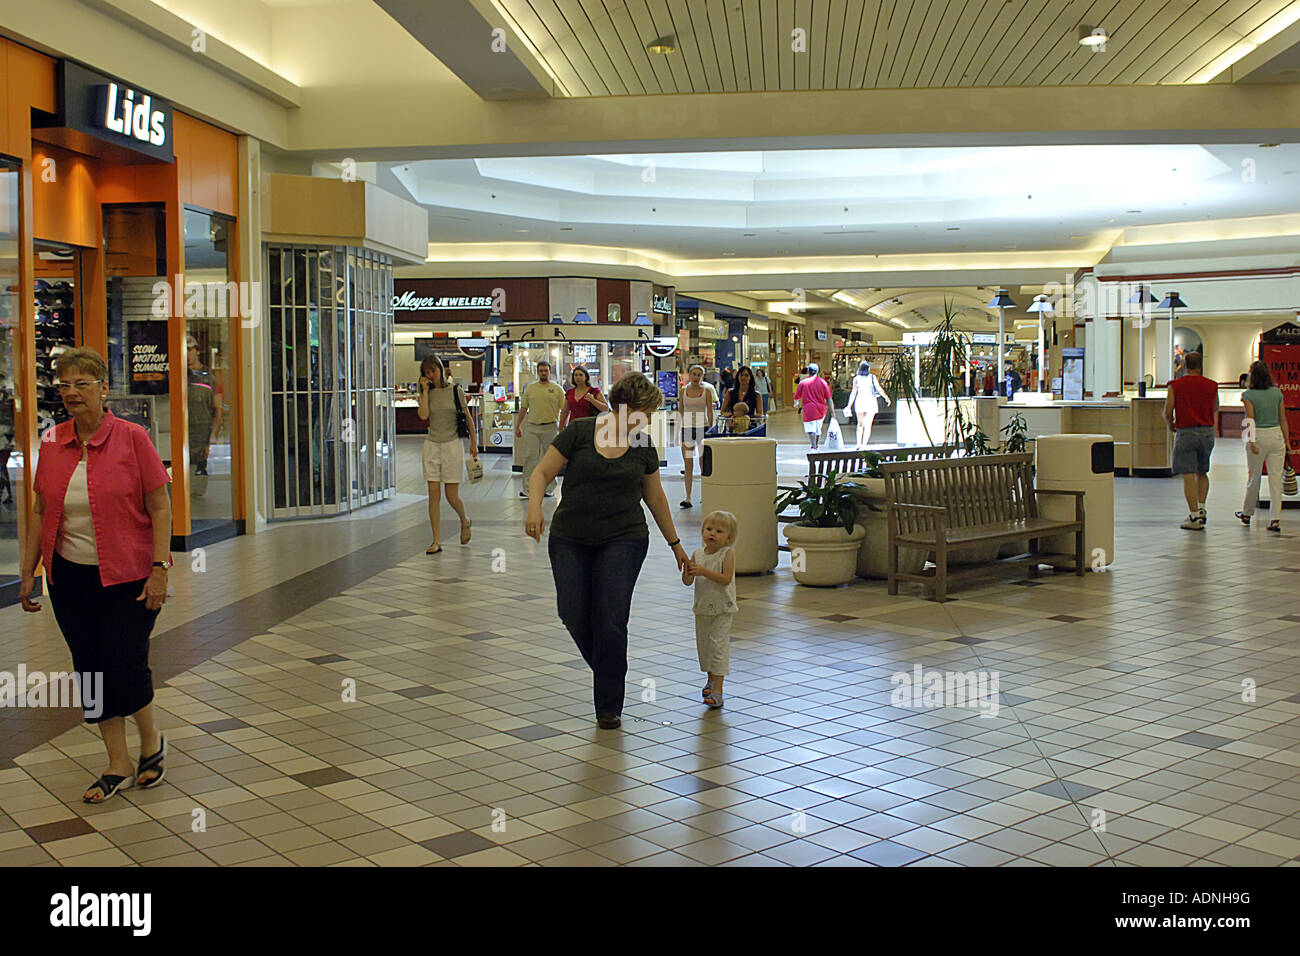 Inside an air conditioned US shopping mall in Michigan Stock Photo